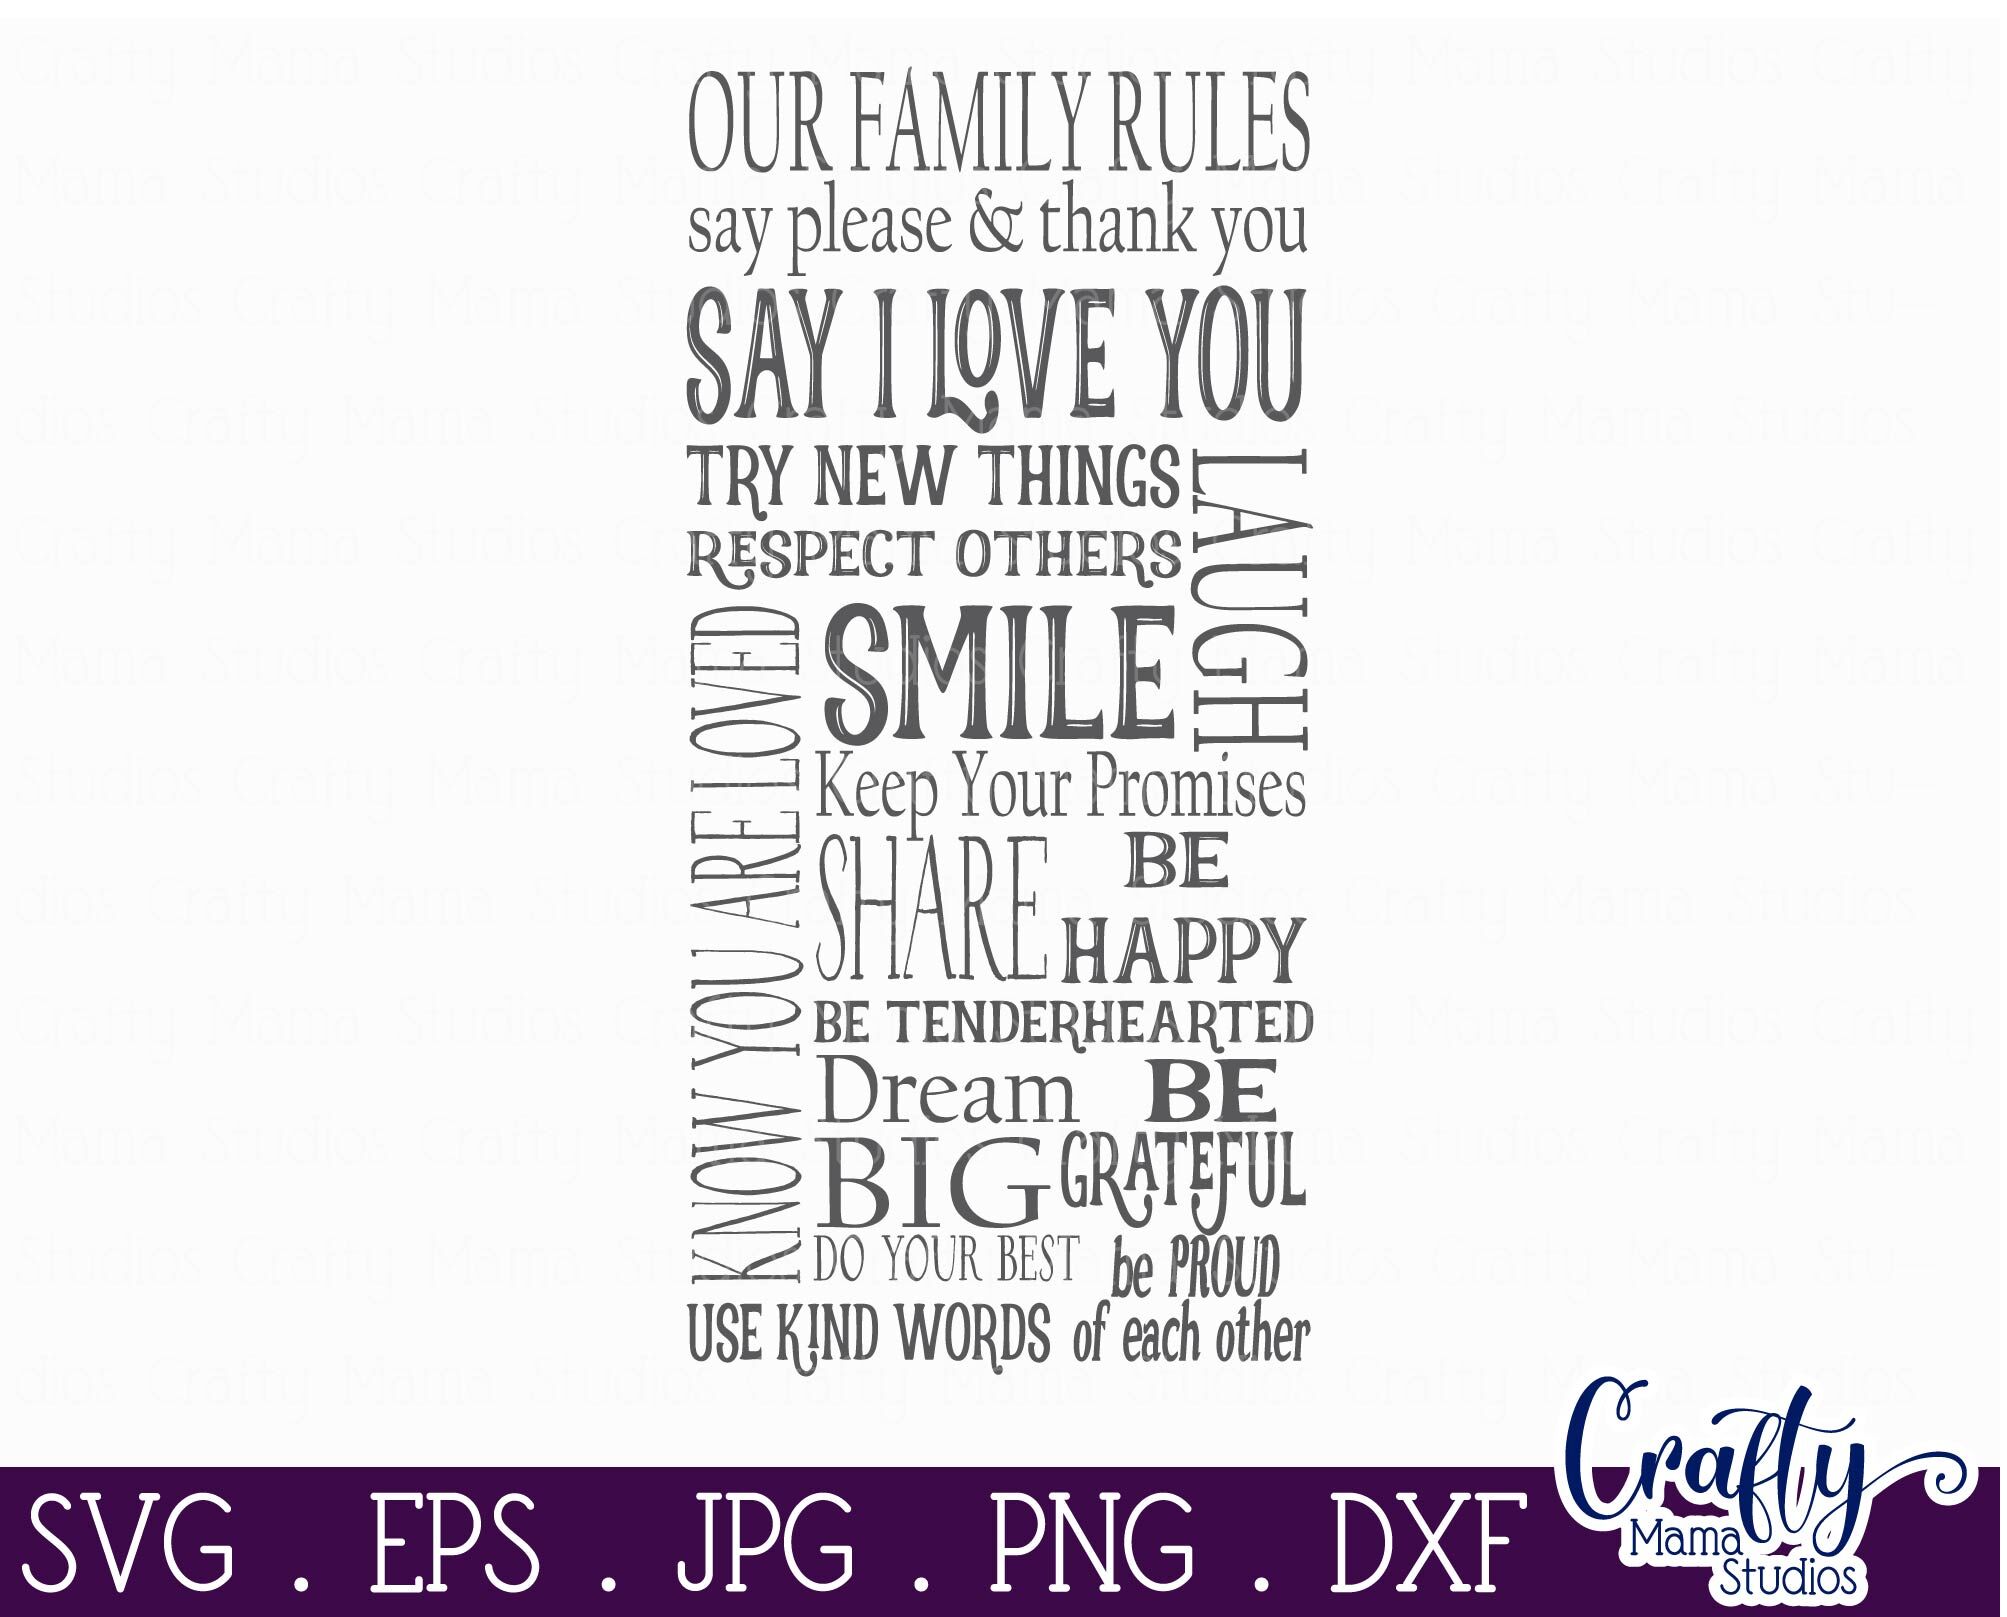 Download Home Sign Svg Farmhouse Svg Family Family Rules Vertical By Crafty Mama Studios Thehungryjpeg Com